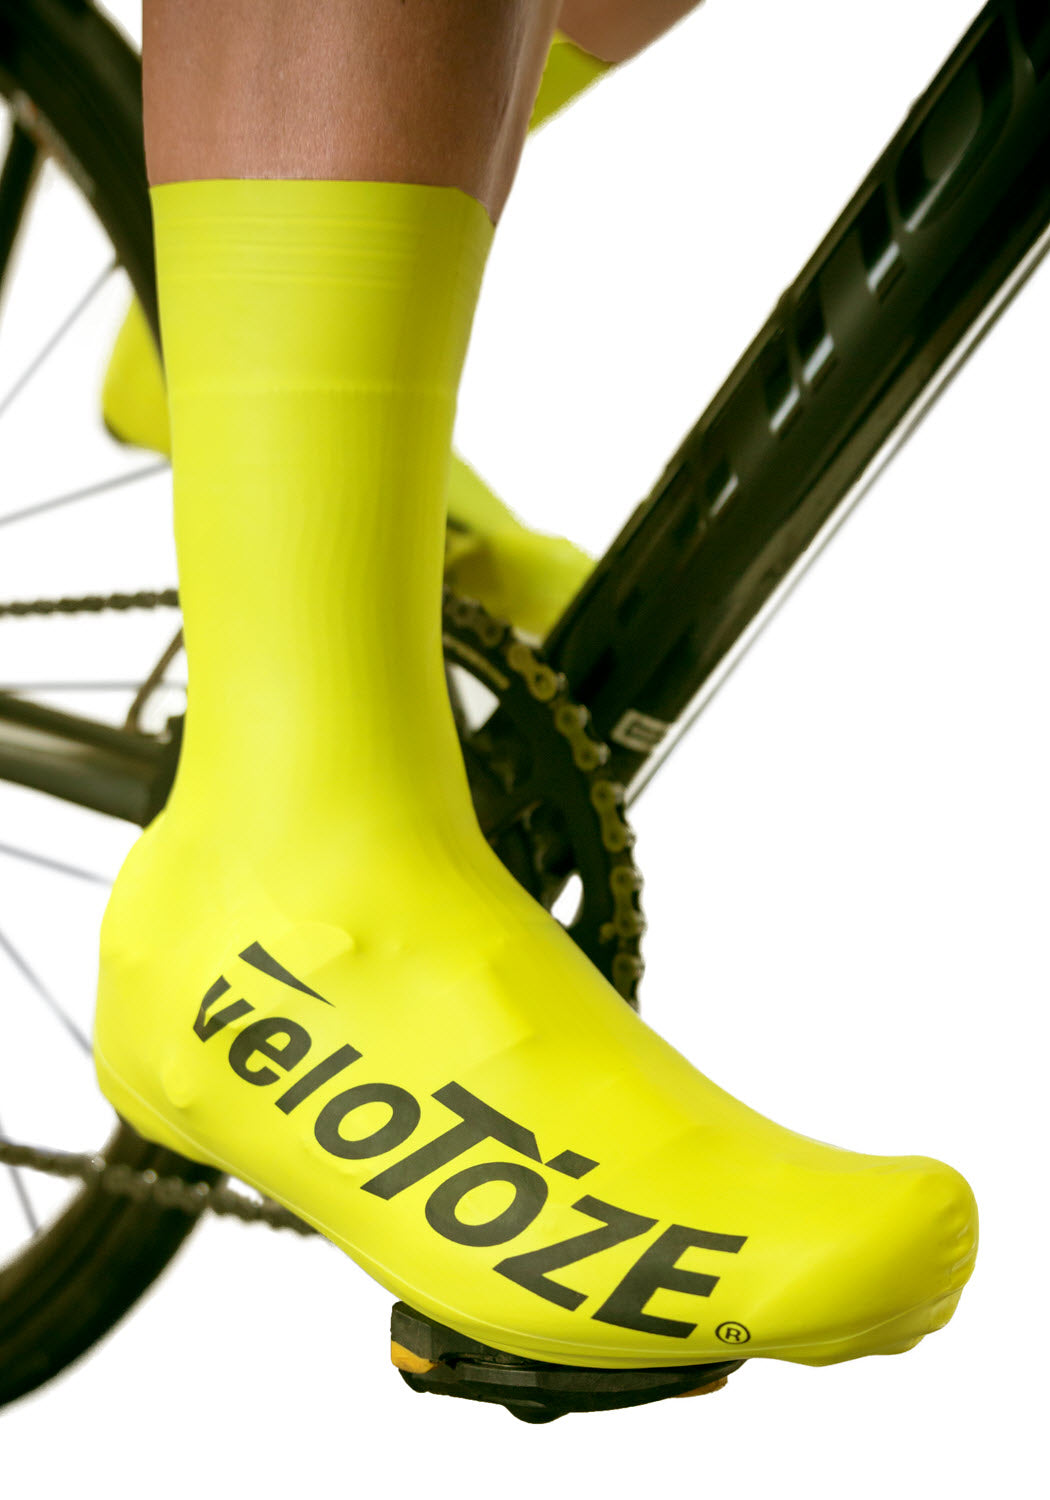 veloToze Tall Shoe Cover - Road 2.0